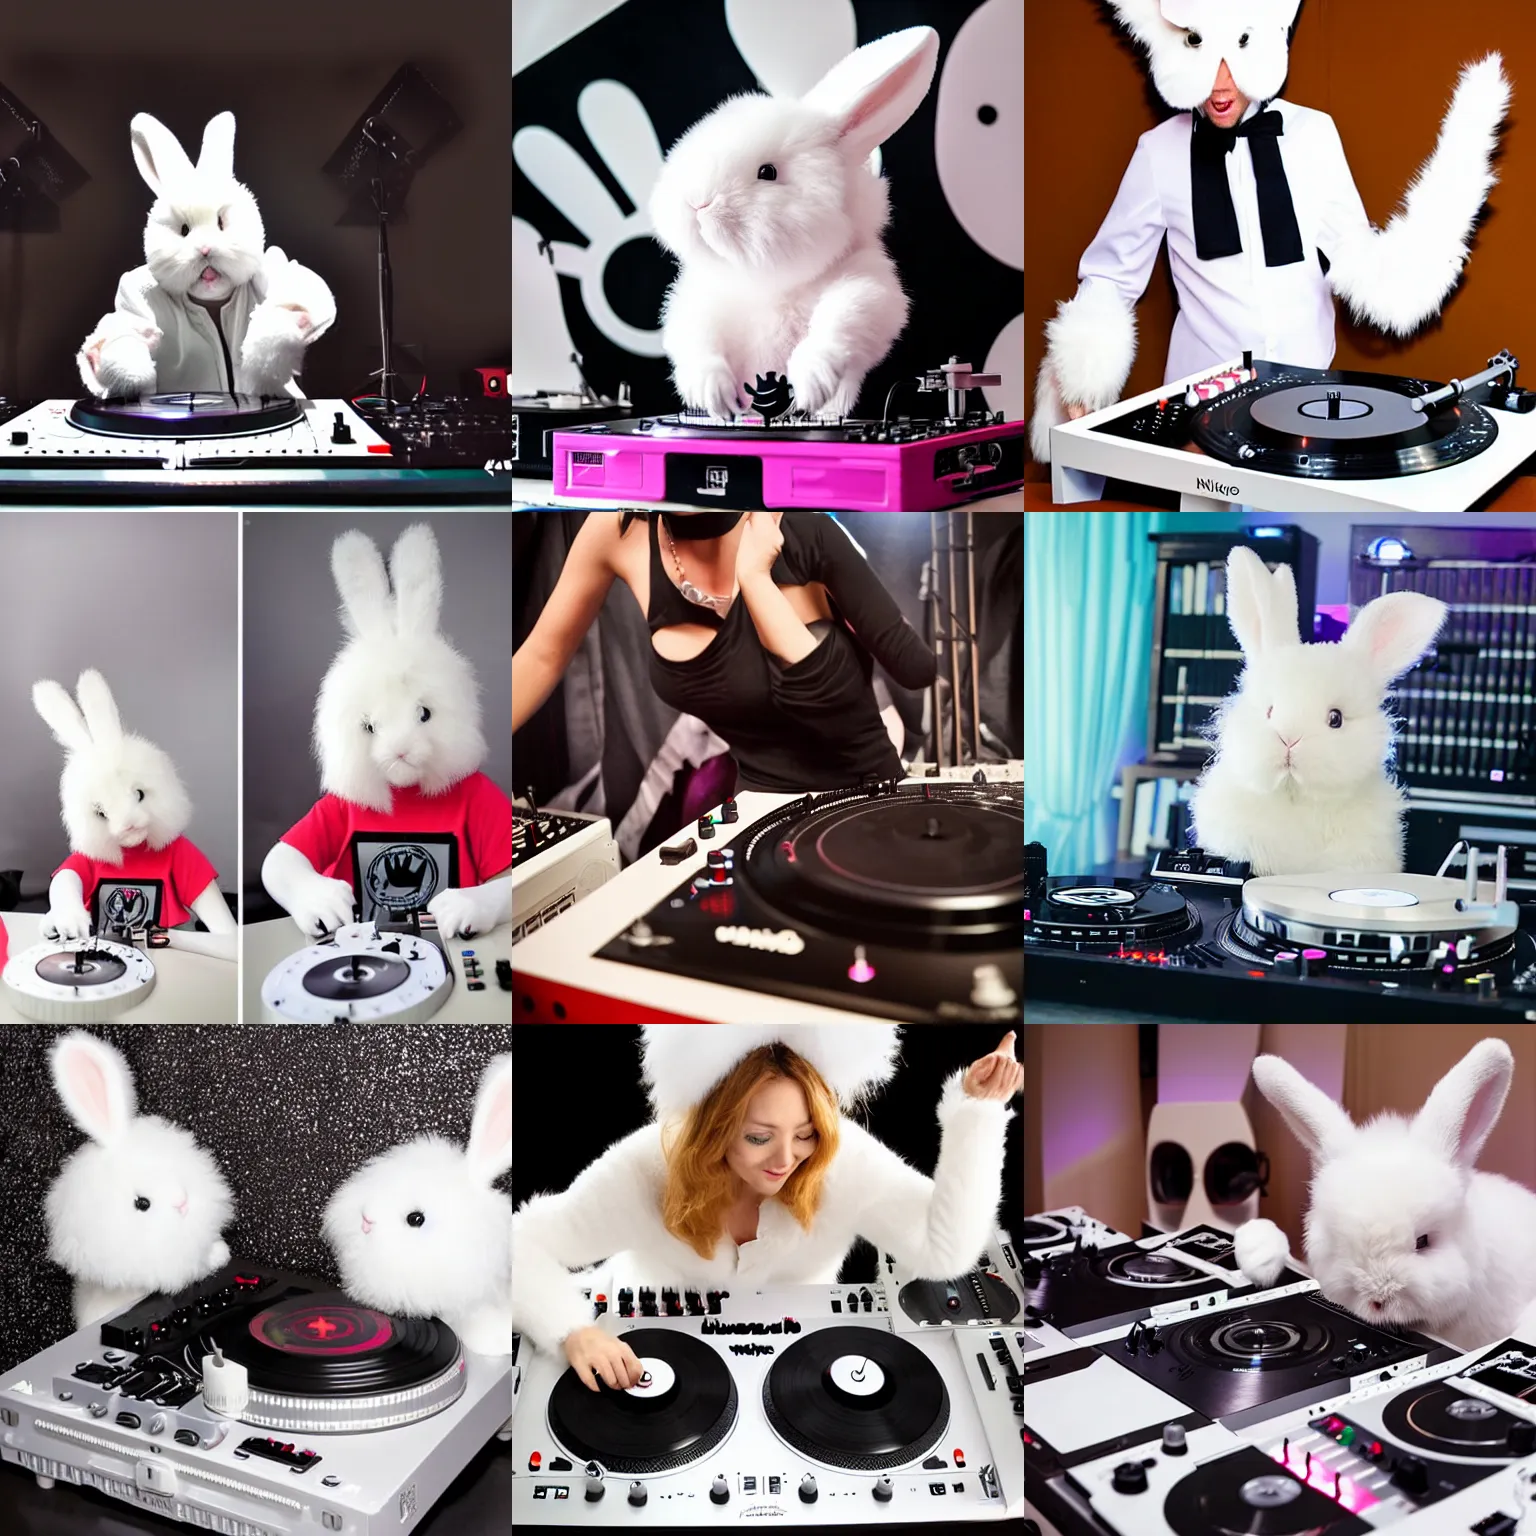 Prompt: super cute fluffy white bunny rabbit ninja DJing with DJ turntables, photoreal